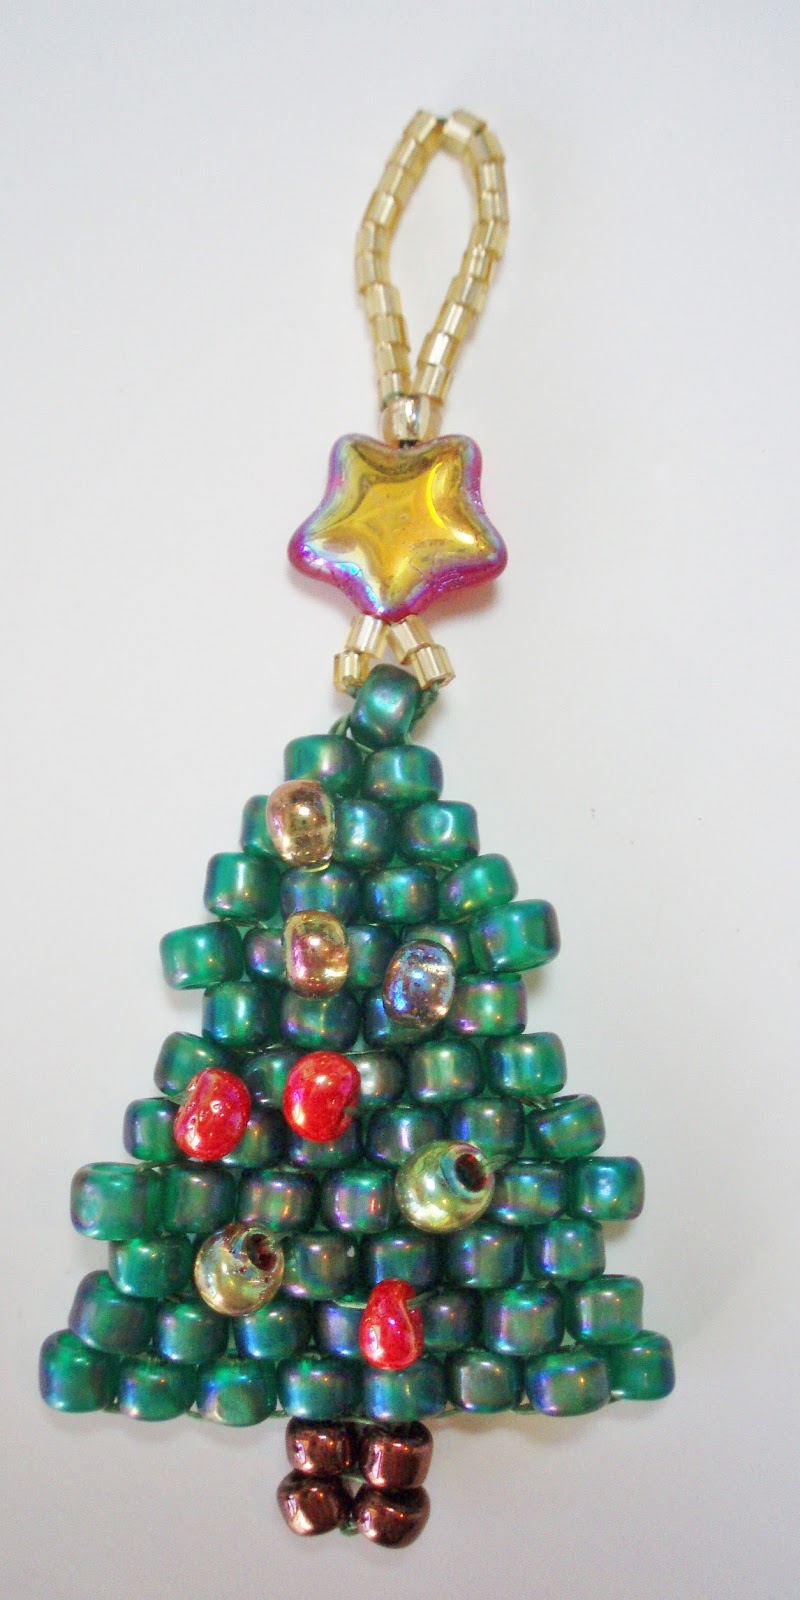 Beaded Christmas Tree Decorations To Make | Search Results | CLARA ...